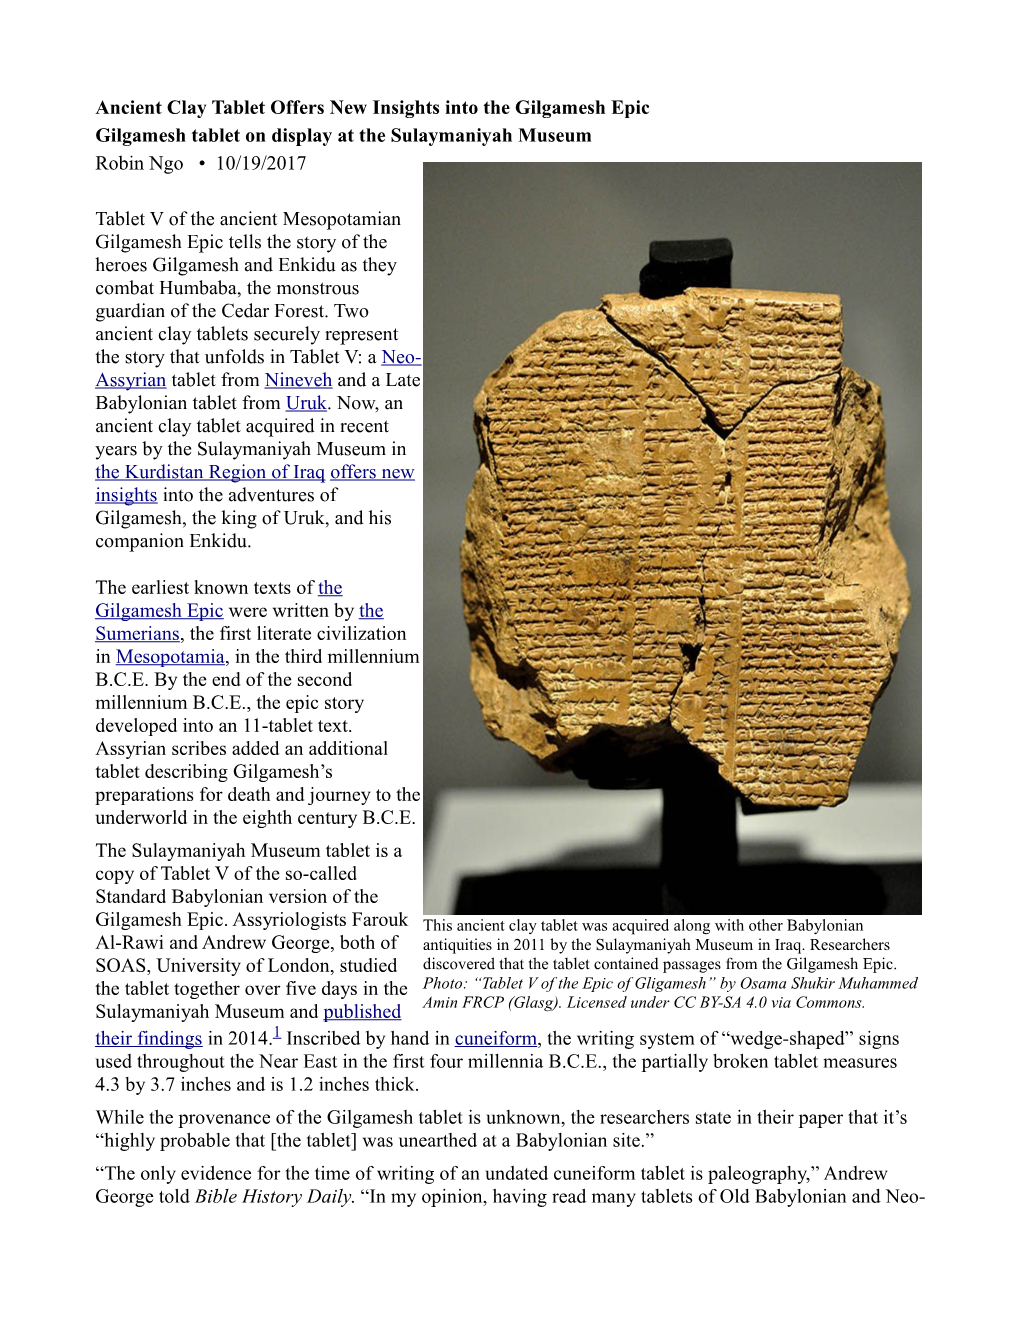 Ancient Clay Tablet Offers New Insights Into the Gilgamesh Epic Gilgamesh Tablet on Display at the Sulaymaniyah Museum Robin Ngo • 10/19/2017